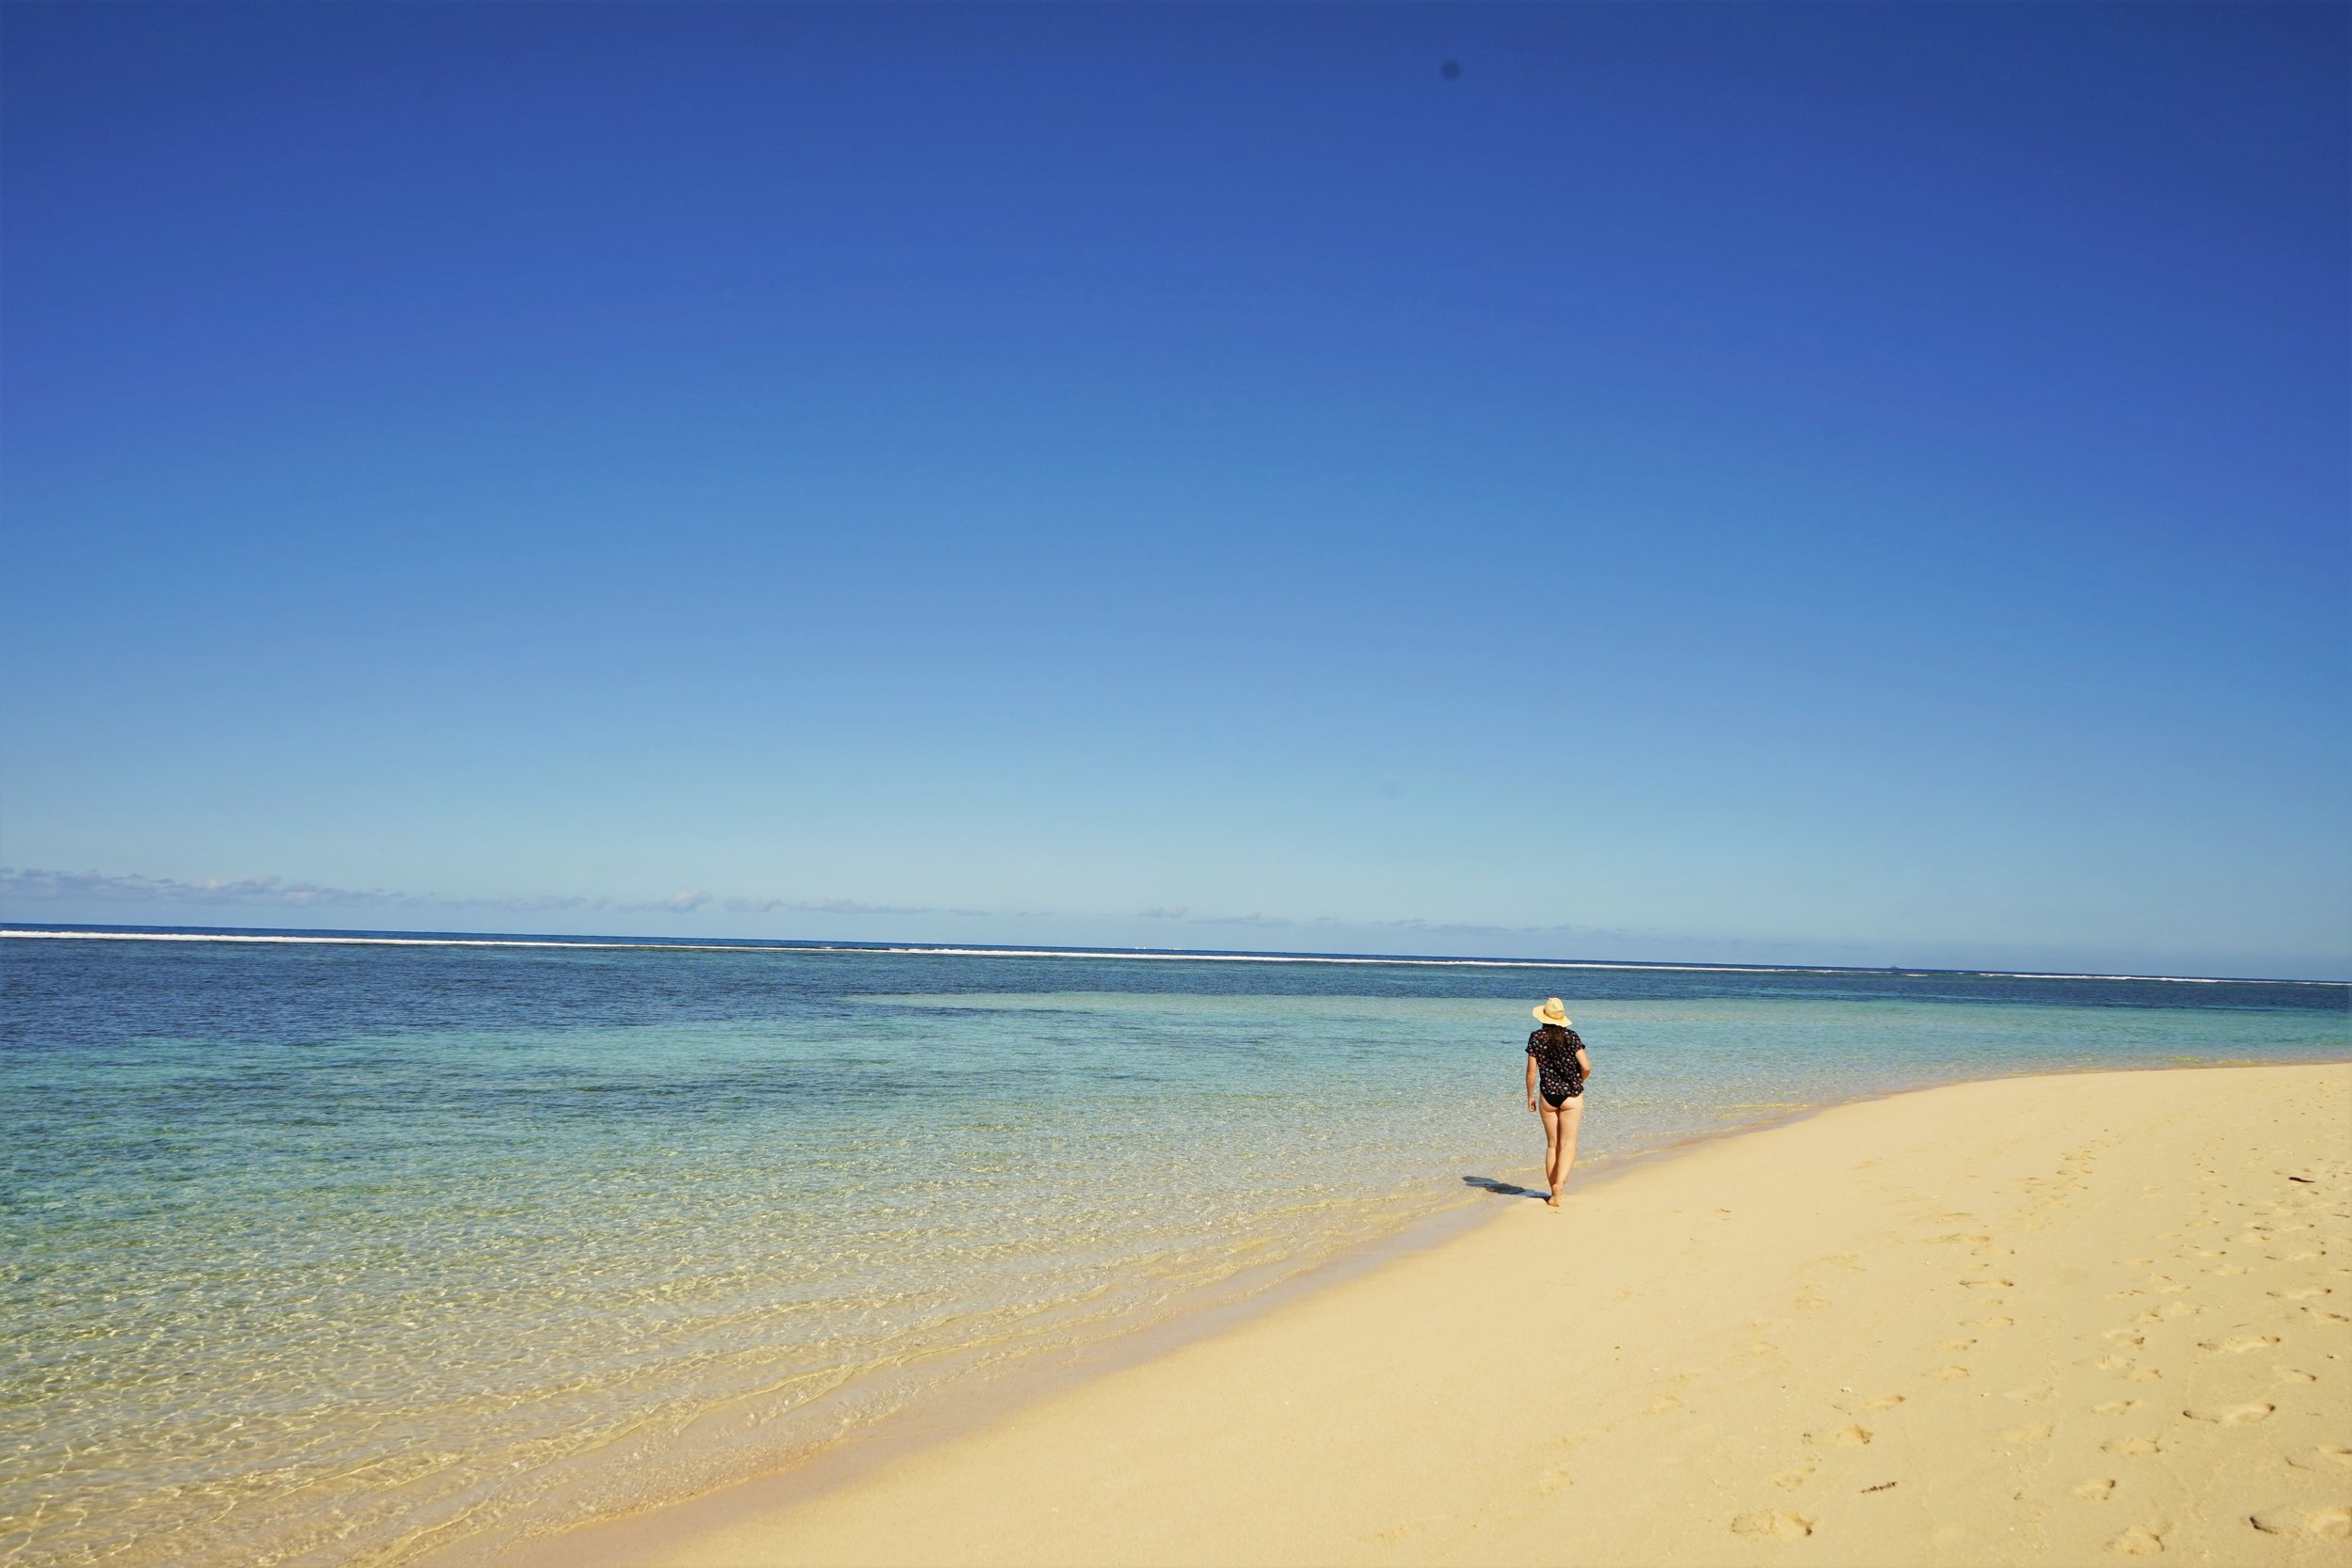 The beaches of new Caledonia is a must do New Caledonia travel tip!